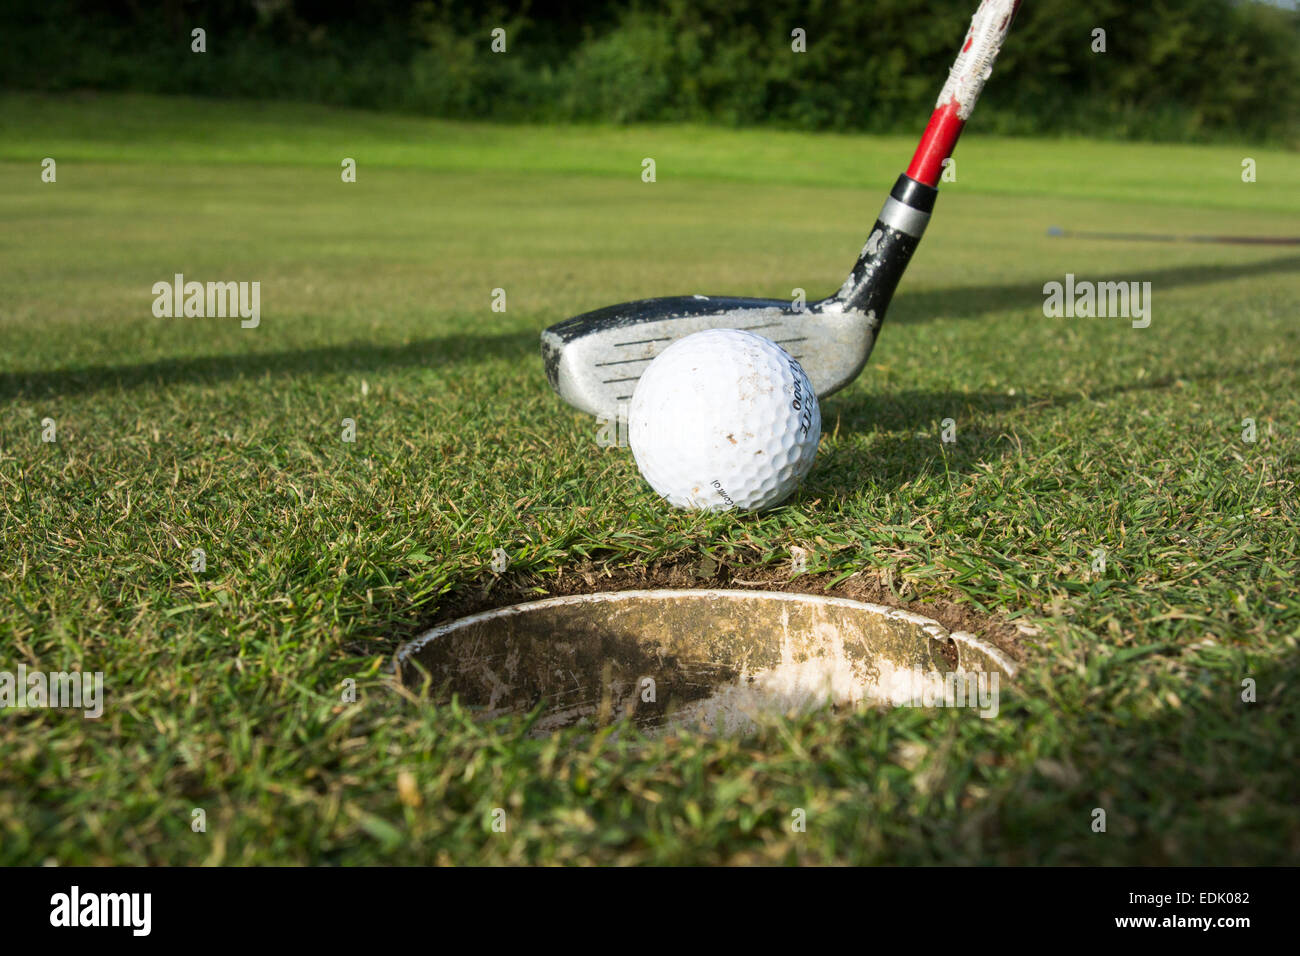 Golfer about to tap ball into hole on a golf course, UK. Stock Photo